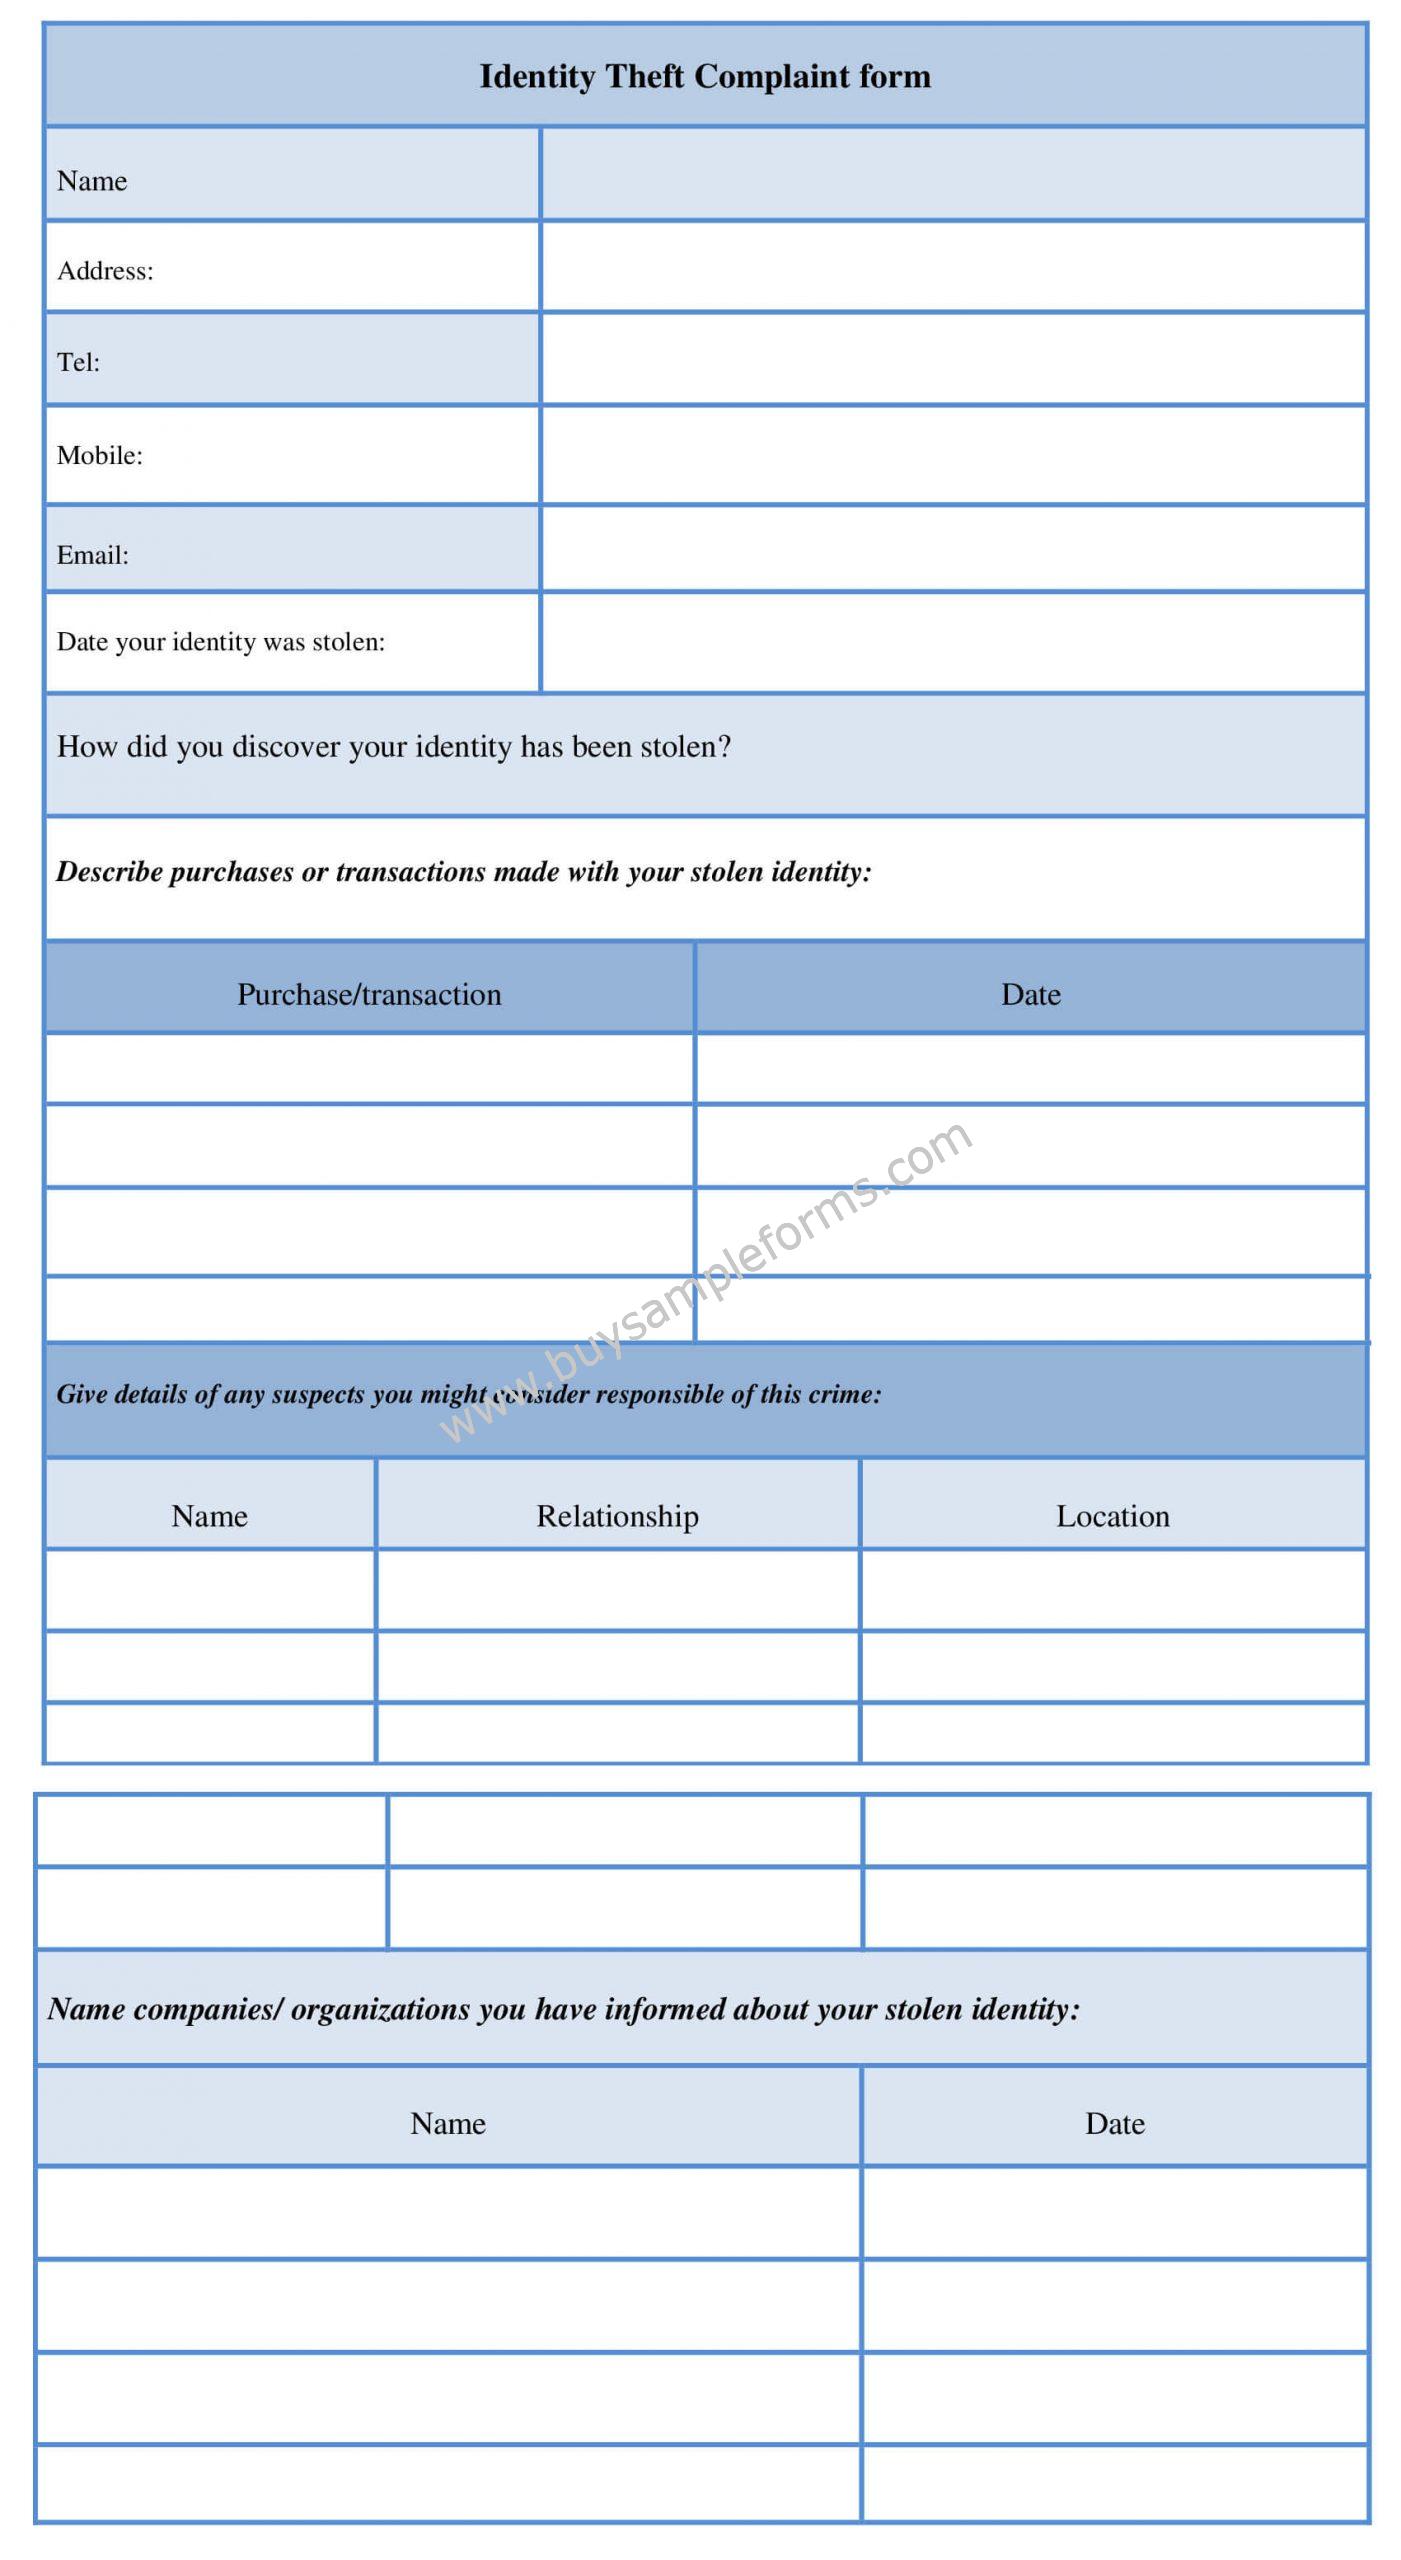 Sample Identity Theft Complaint Form Template